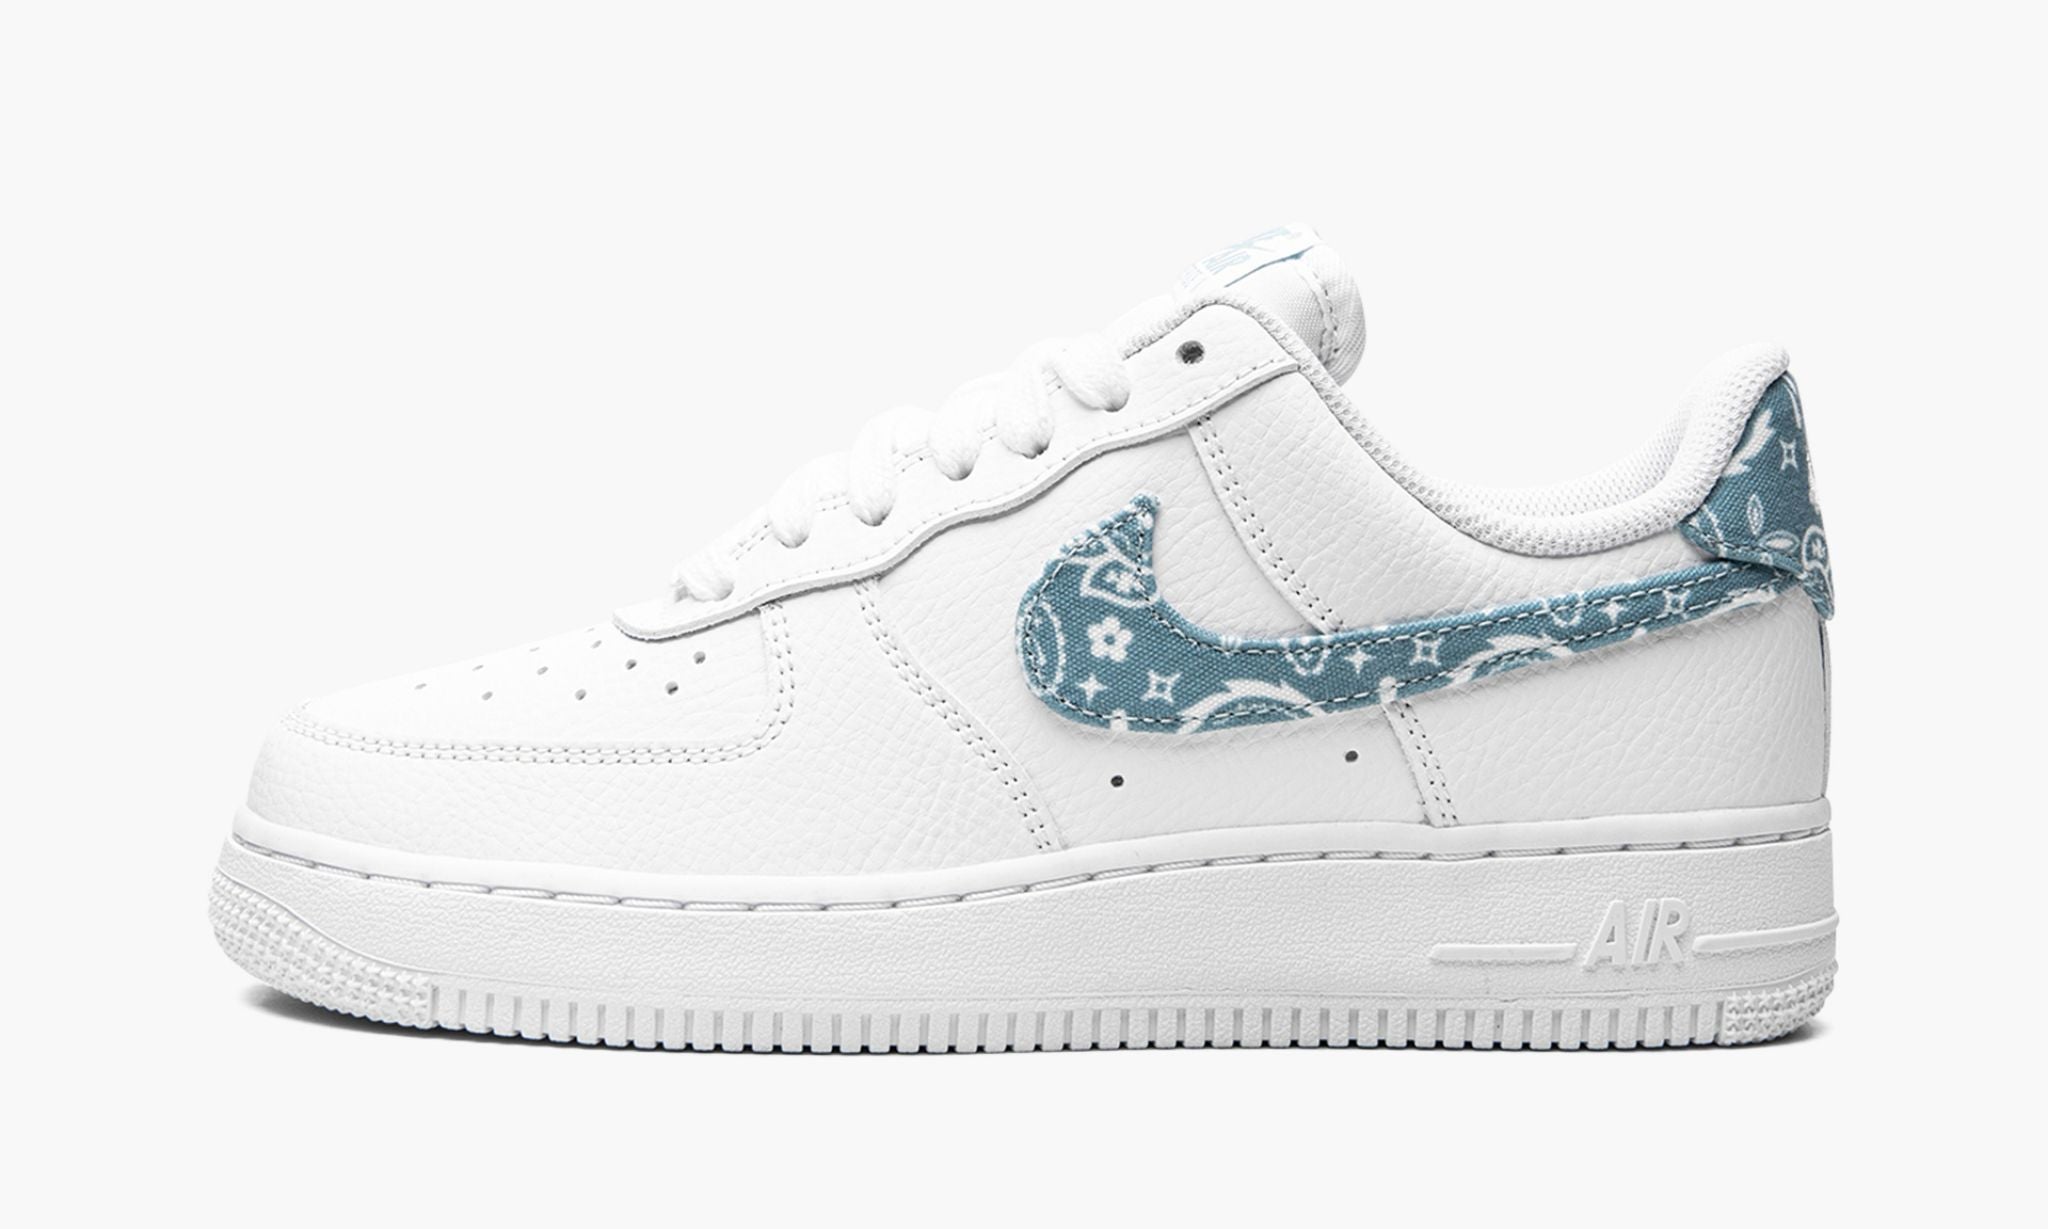 Nike Air Force 1 Low Essential Worn Blue Paisley (WMNS)